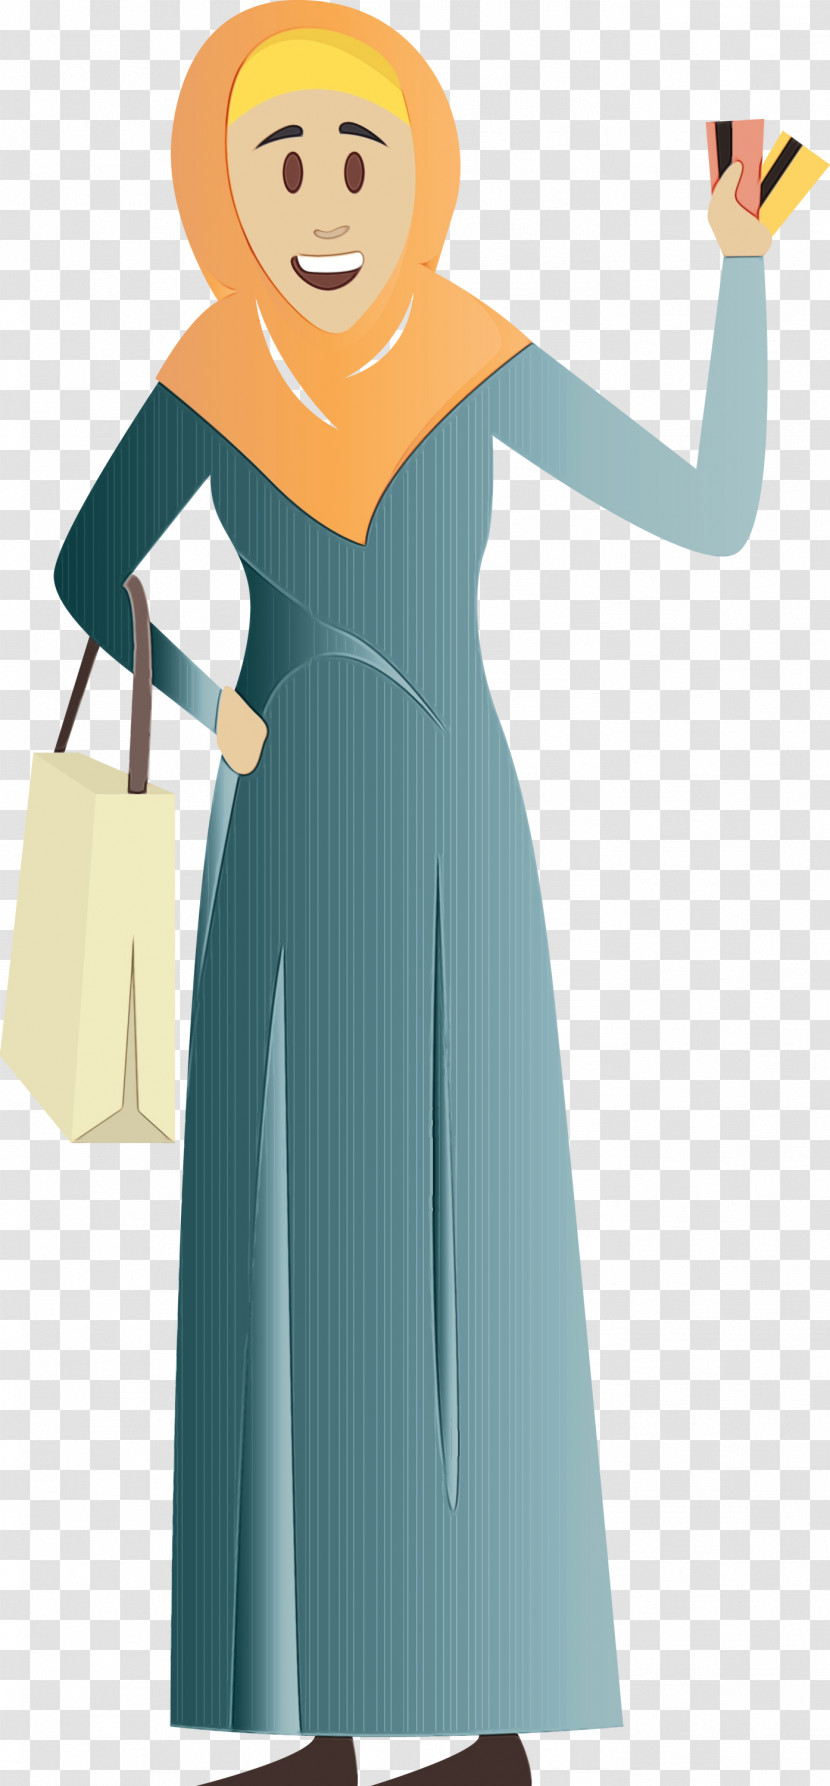 Clothing Dress Turquoise Blue Teal Transparent PNG